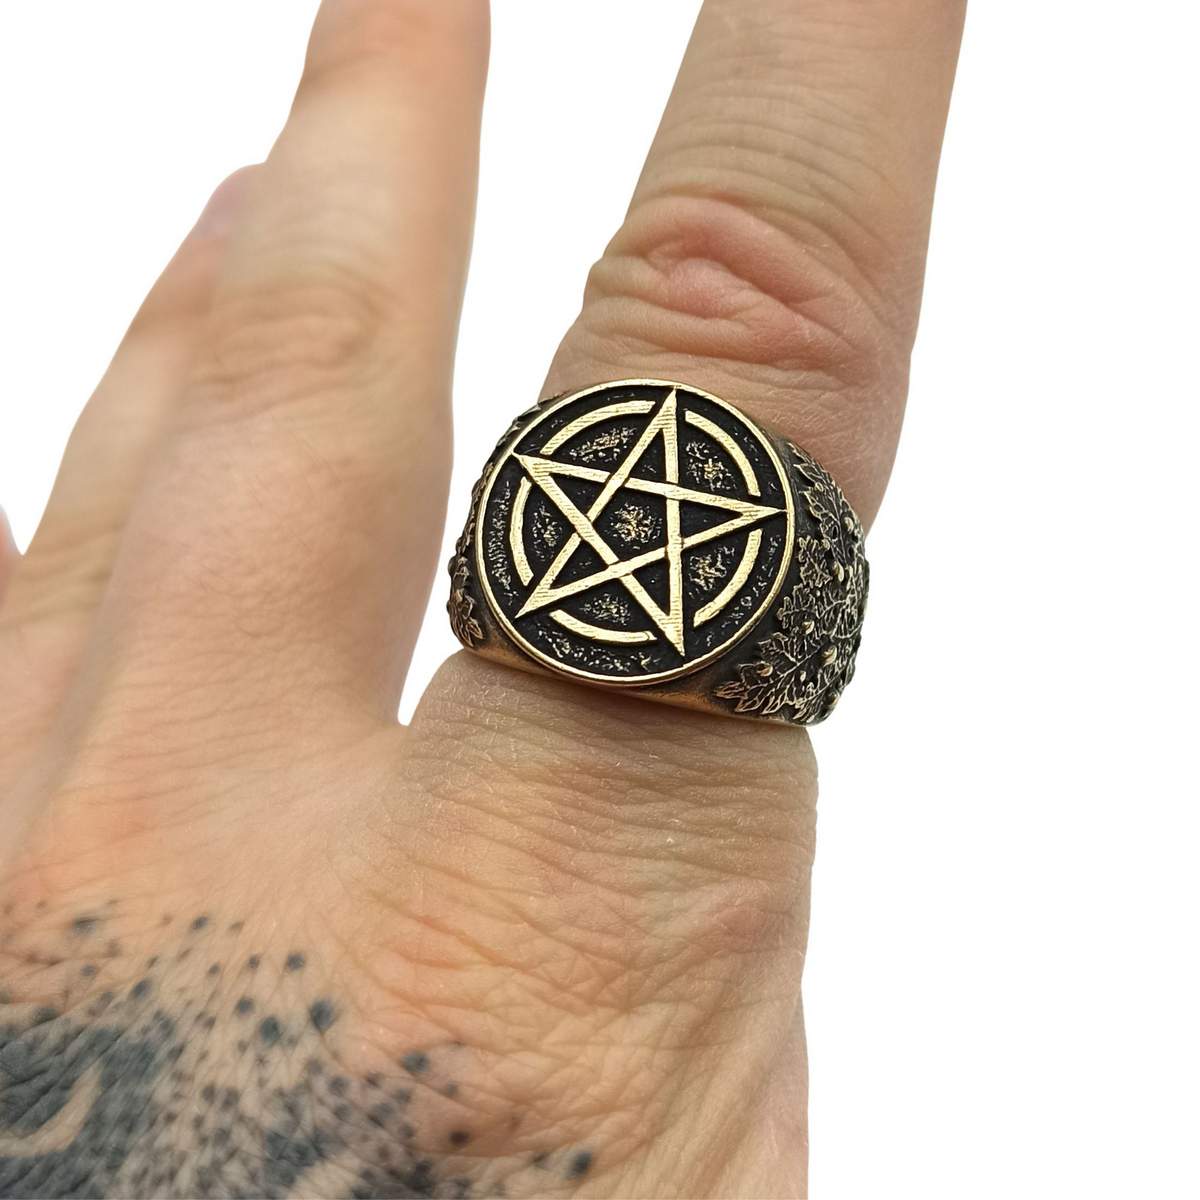 Wiccan pentacle ring from bronze   